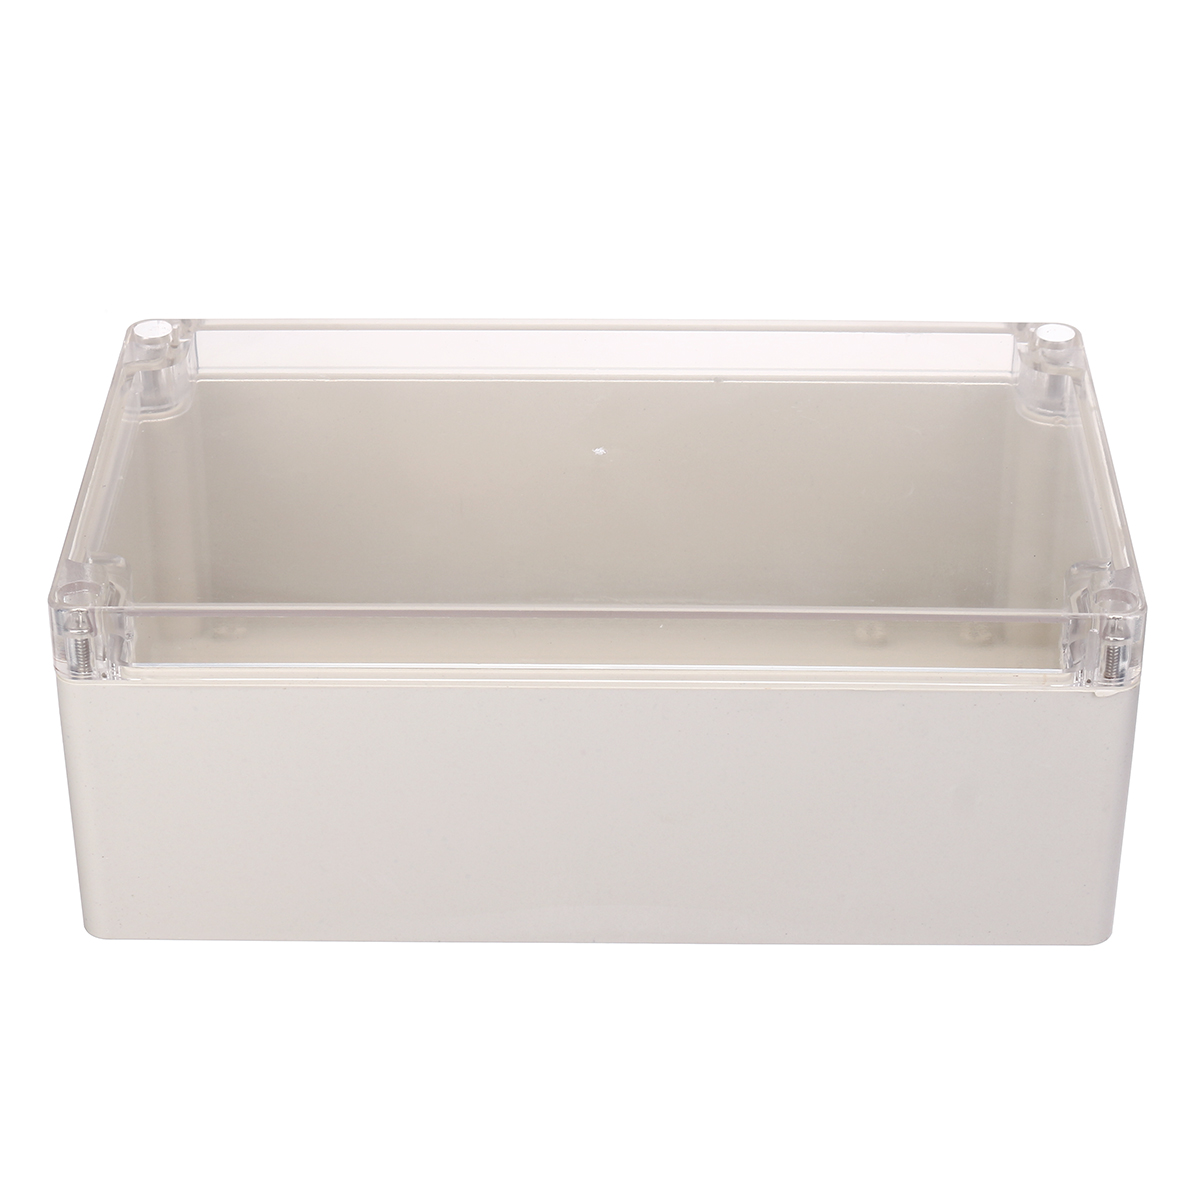 Plastic-Waterproof-Electronic-Project-Box-Clear-Cover-Electronic-Project-Case-20012075mm-1595734-9